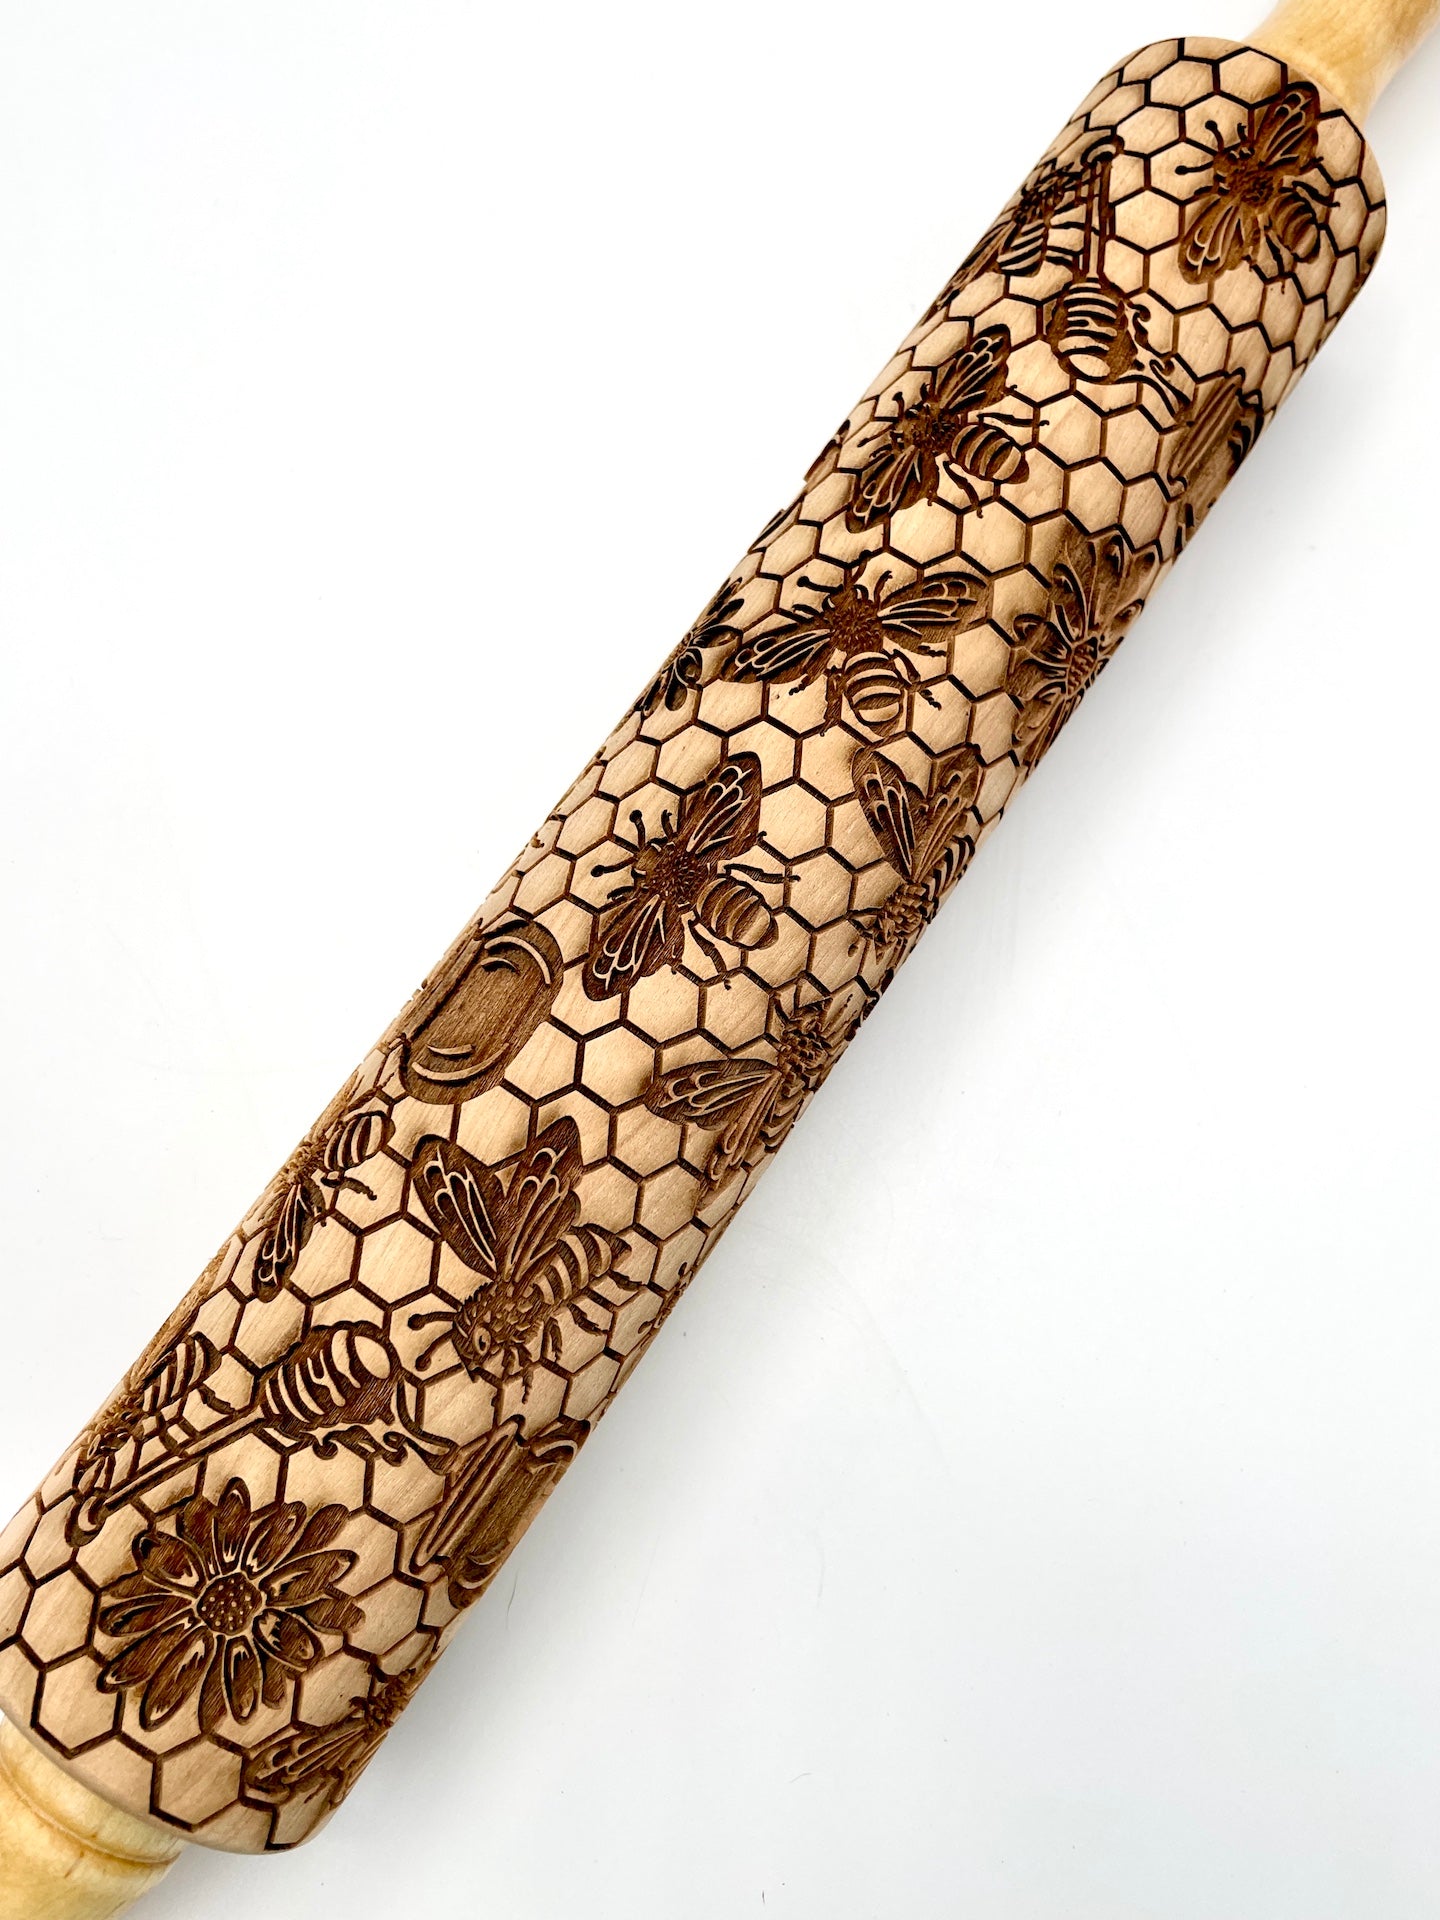 Honey Bees Textured Rolling Pin